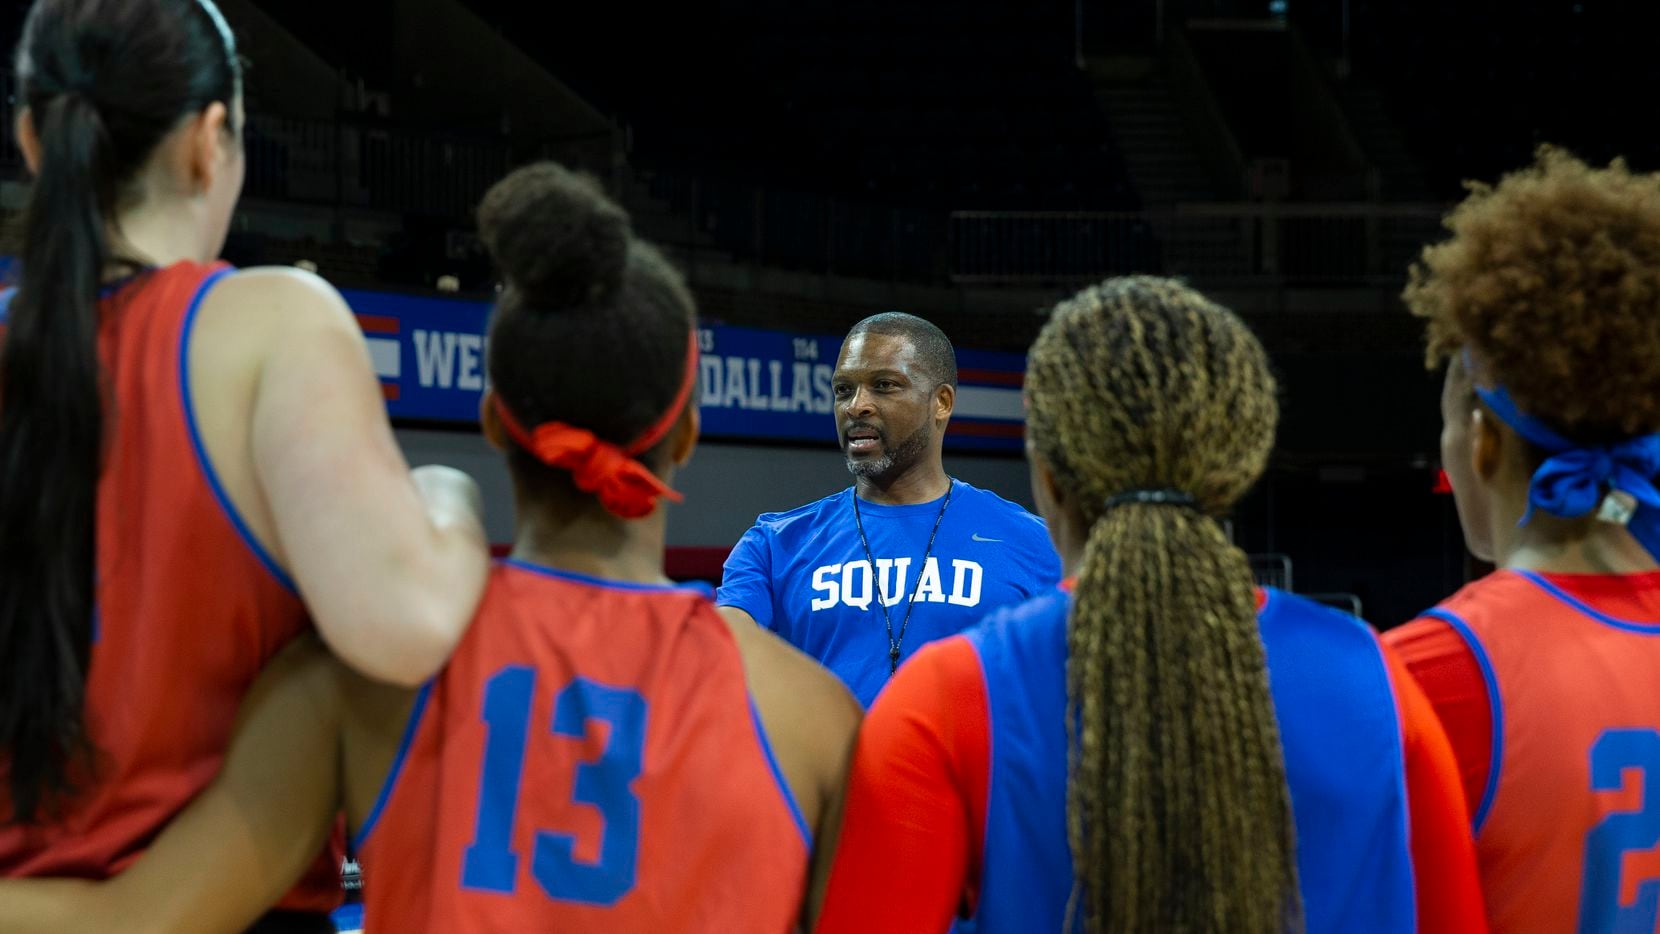 Travis Mays, head coach of SMU women's basketball, gives final directions to his players to close out a team practice at the Moody Coliseum on Friday, Jan. 3, 2020. The SMU women's basketball team faced the No. 1 ranked University of Connecticut Huskies on Sunday, but were defeated 80-42. (Lynda M. Gonzalez/The Dallas Morning News)